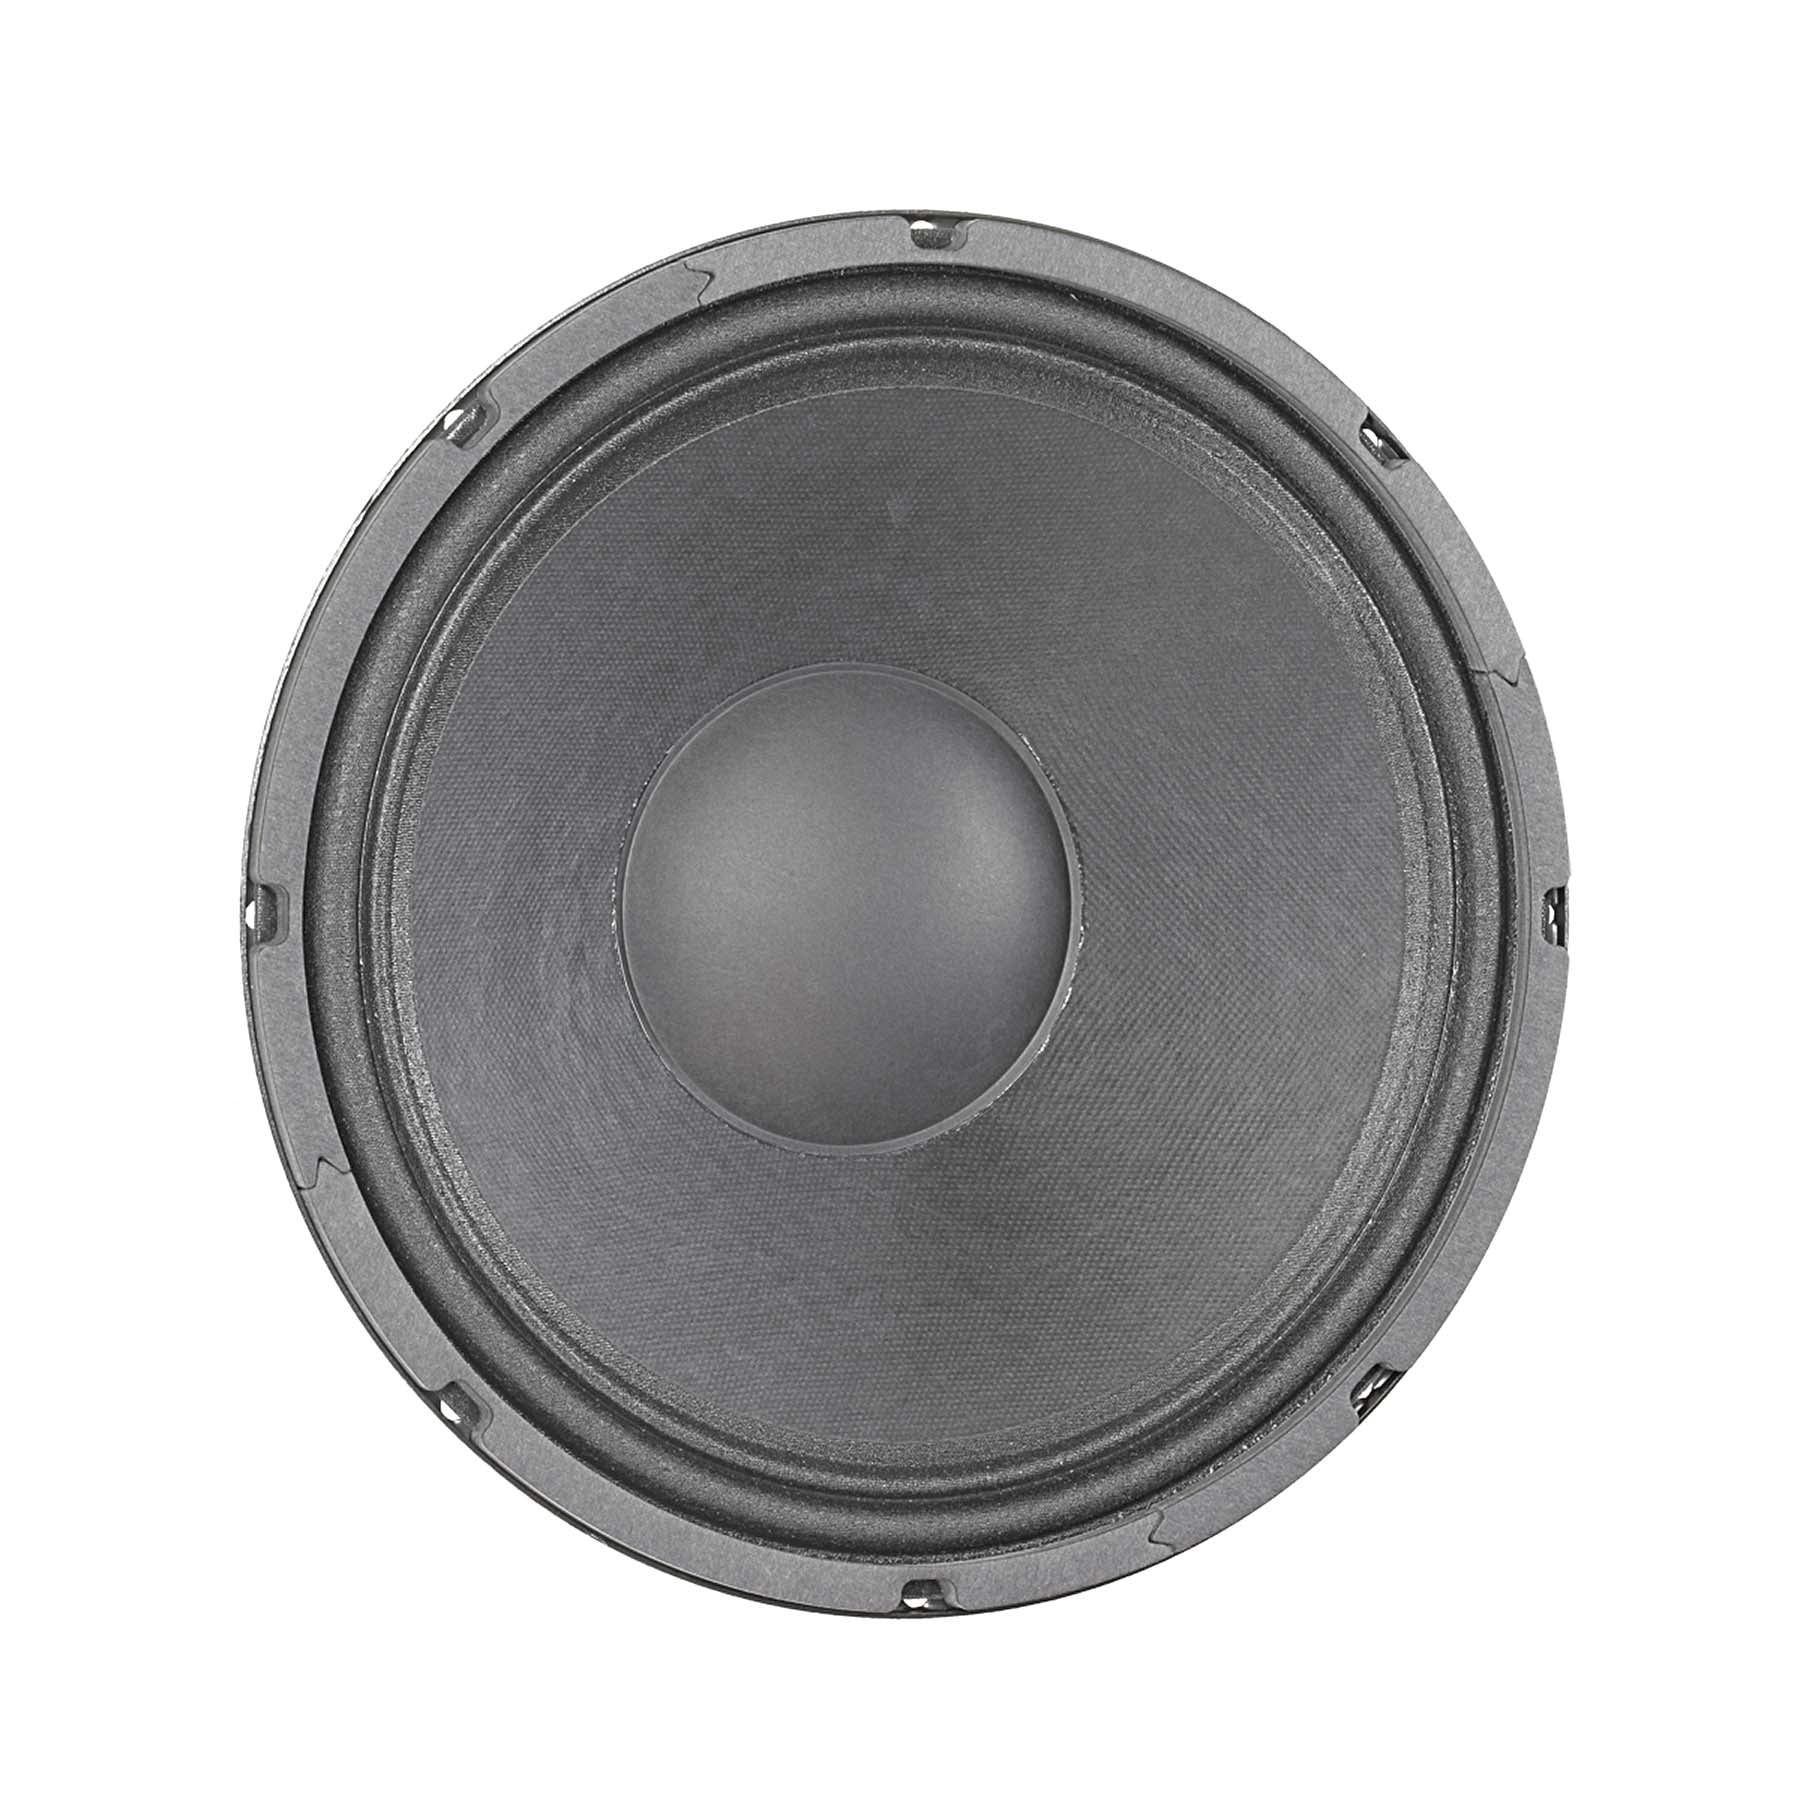 12 inch Eminence American Standard Series Replacement Speaker